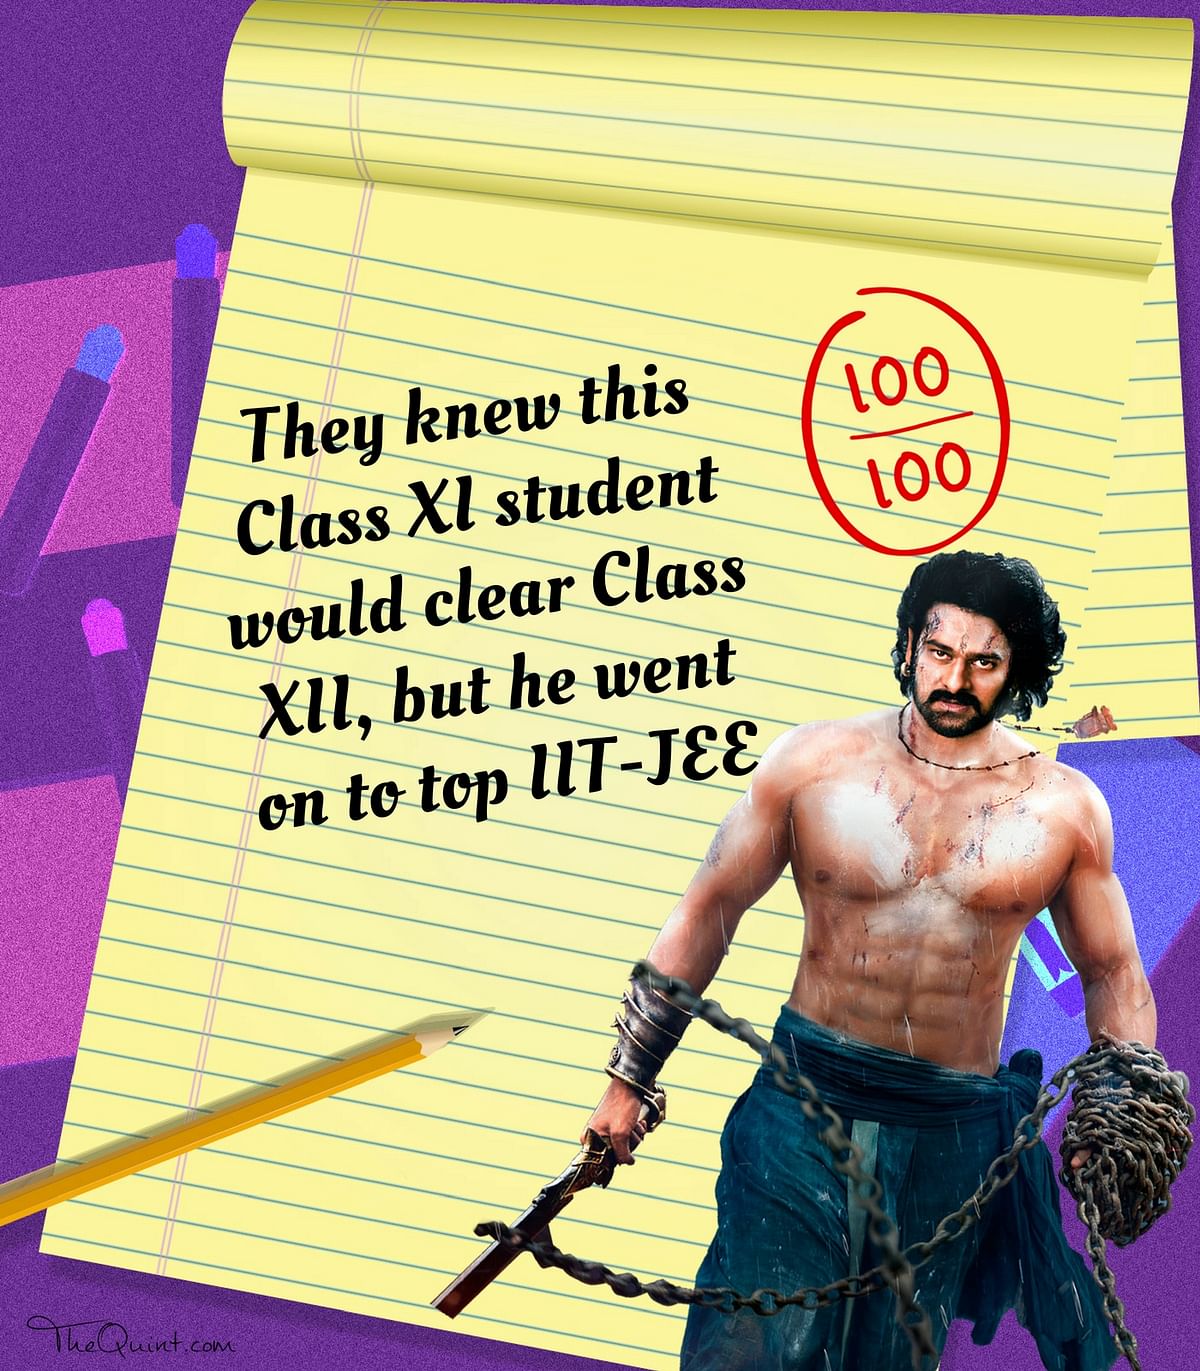 Would you do friendship with Baahubali in school? 